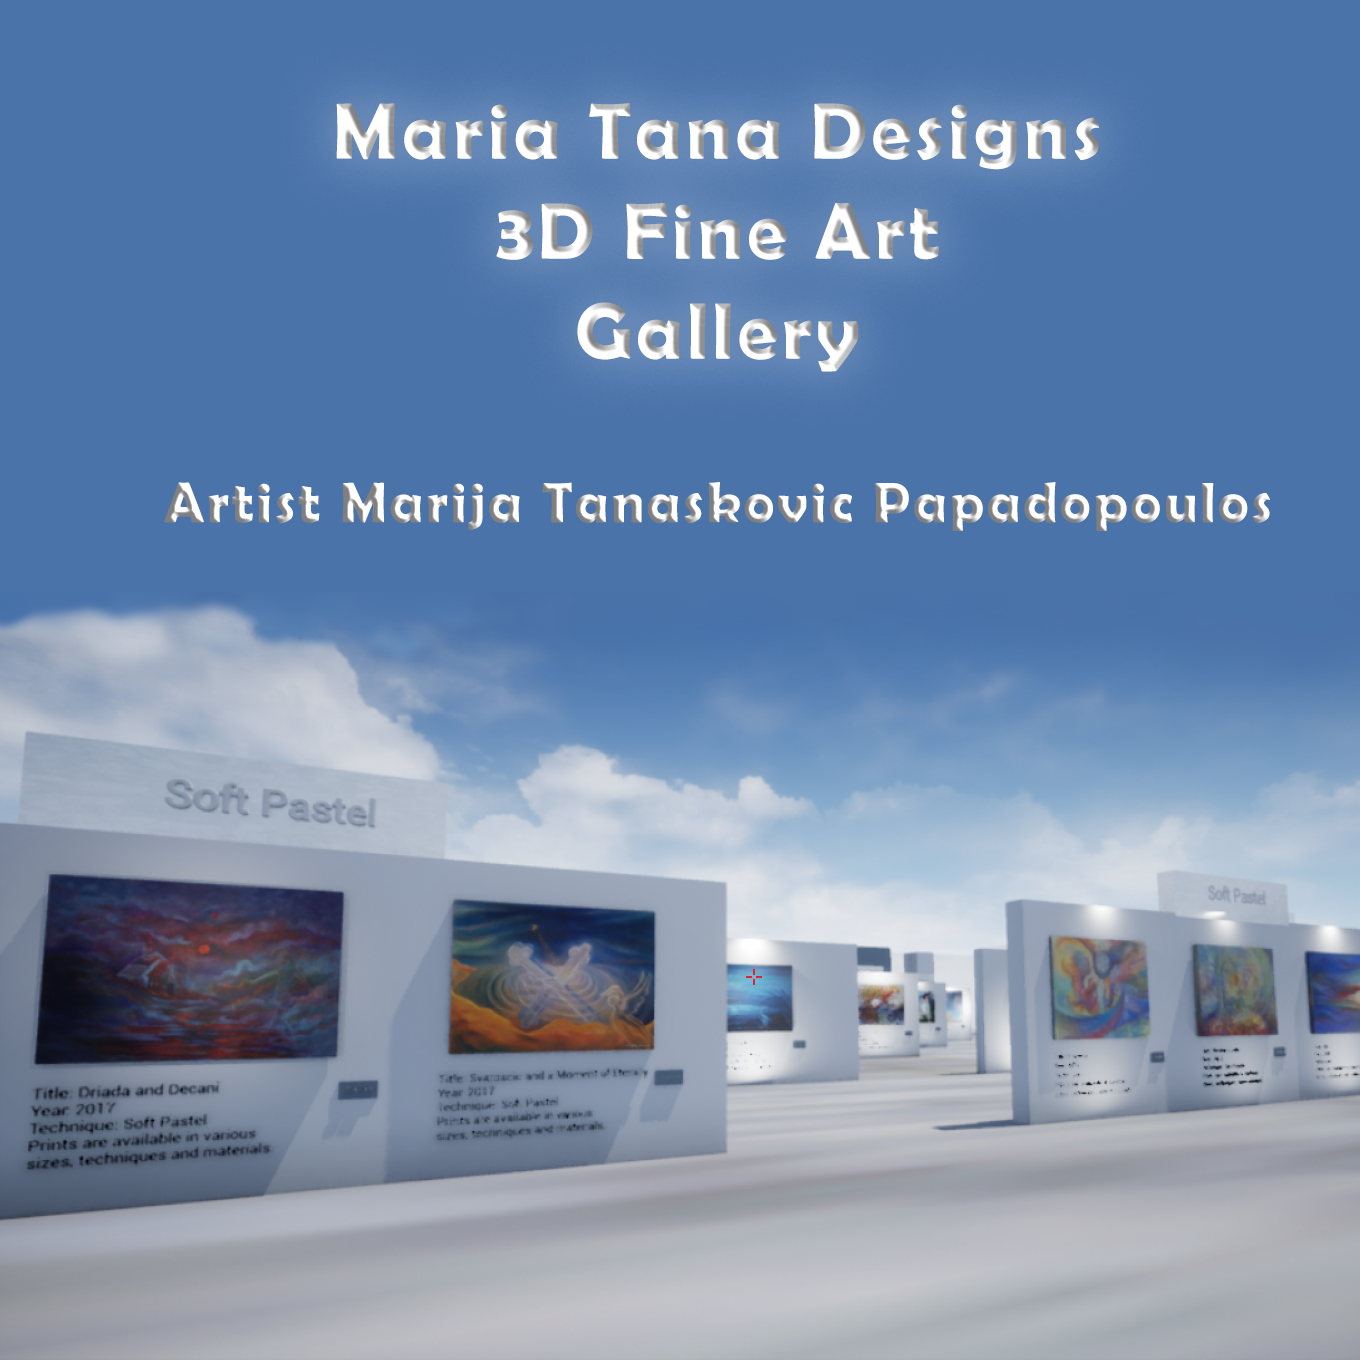 ICONS, landing images and marketing materials for 3D gallery